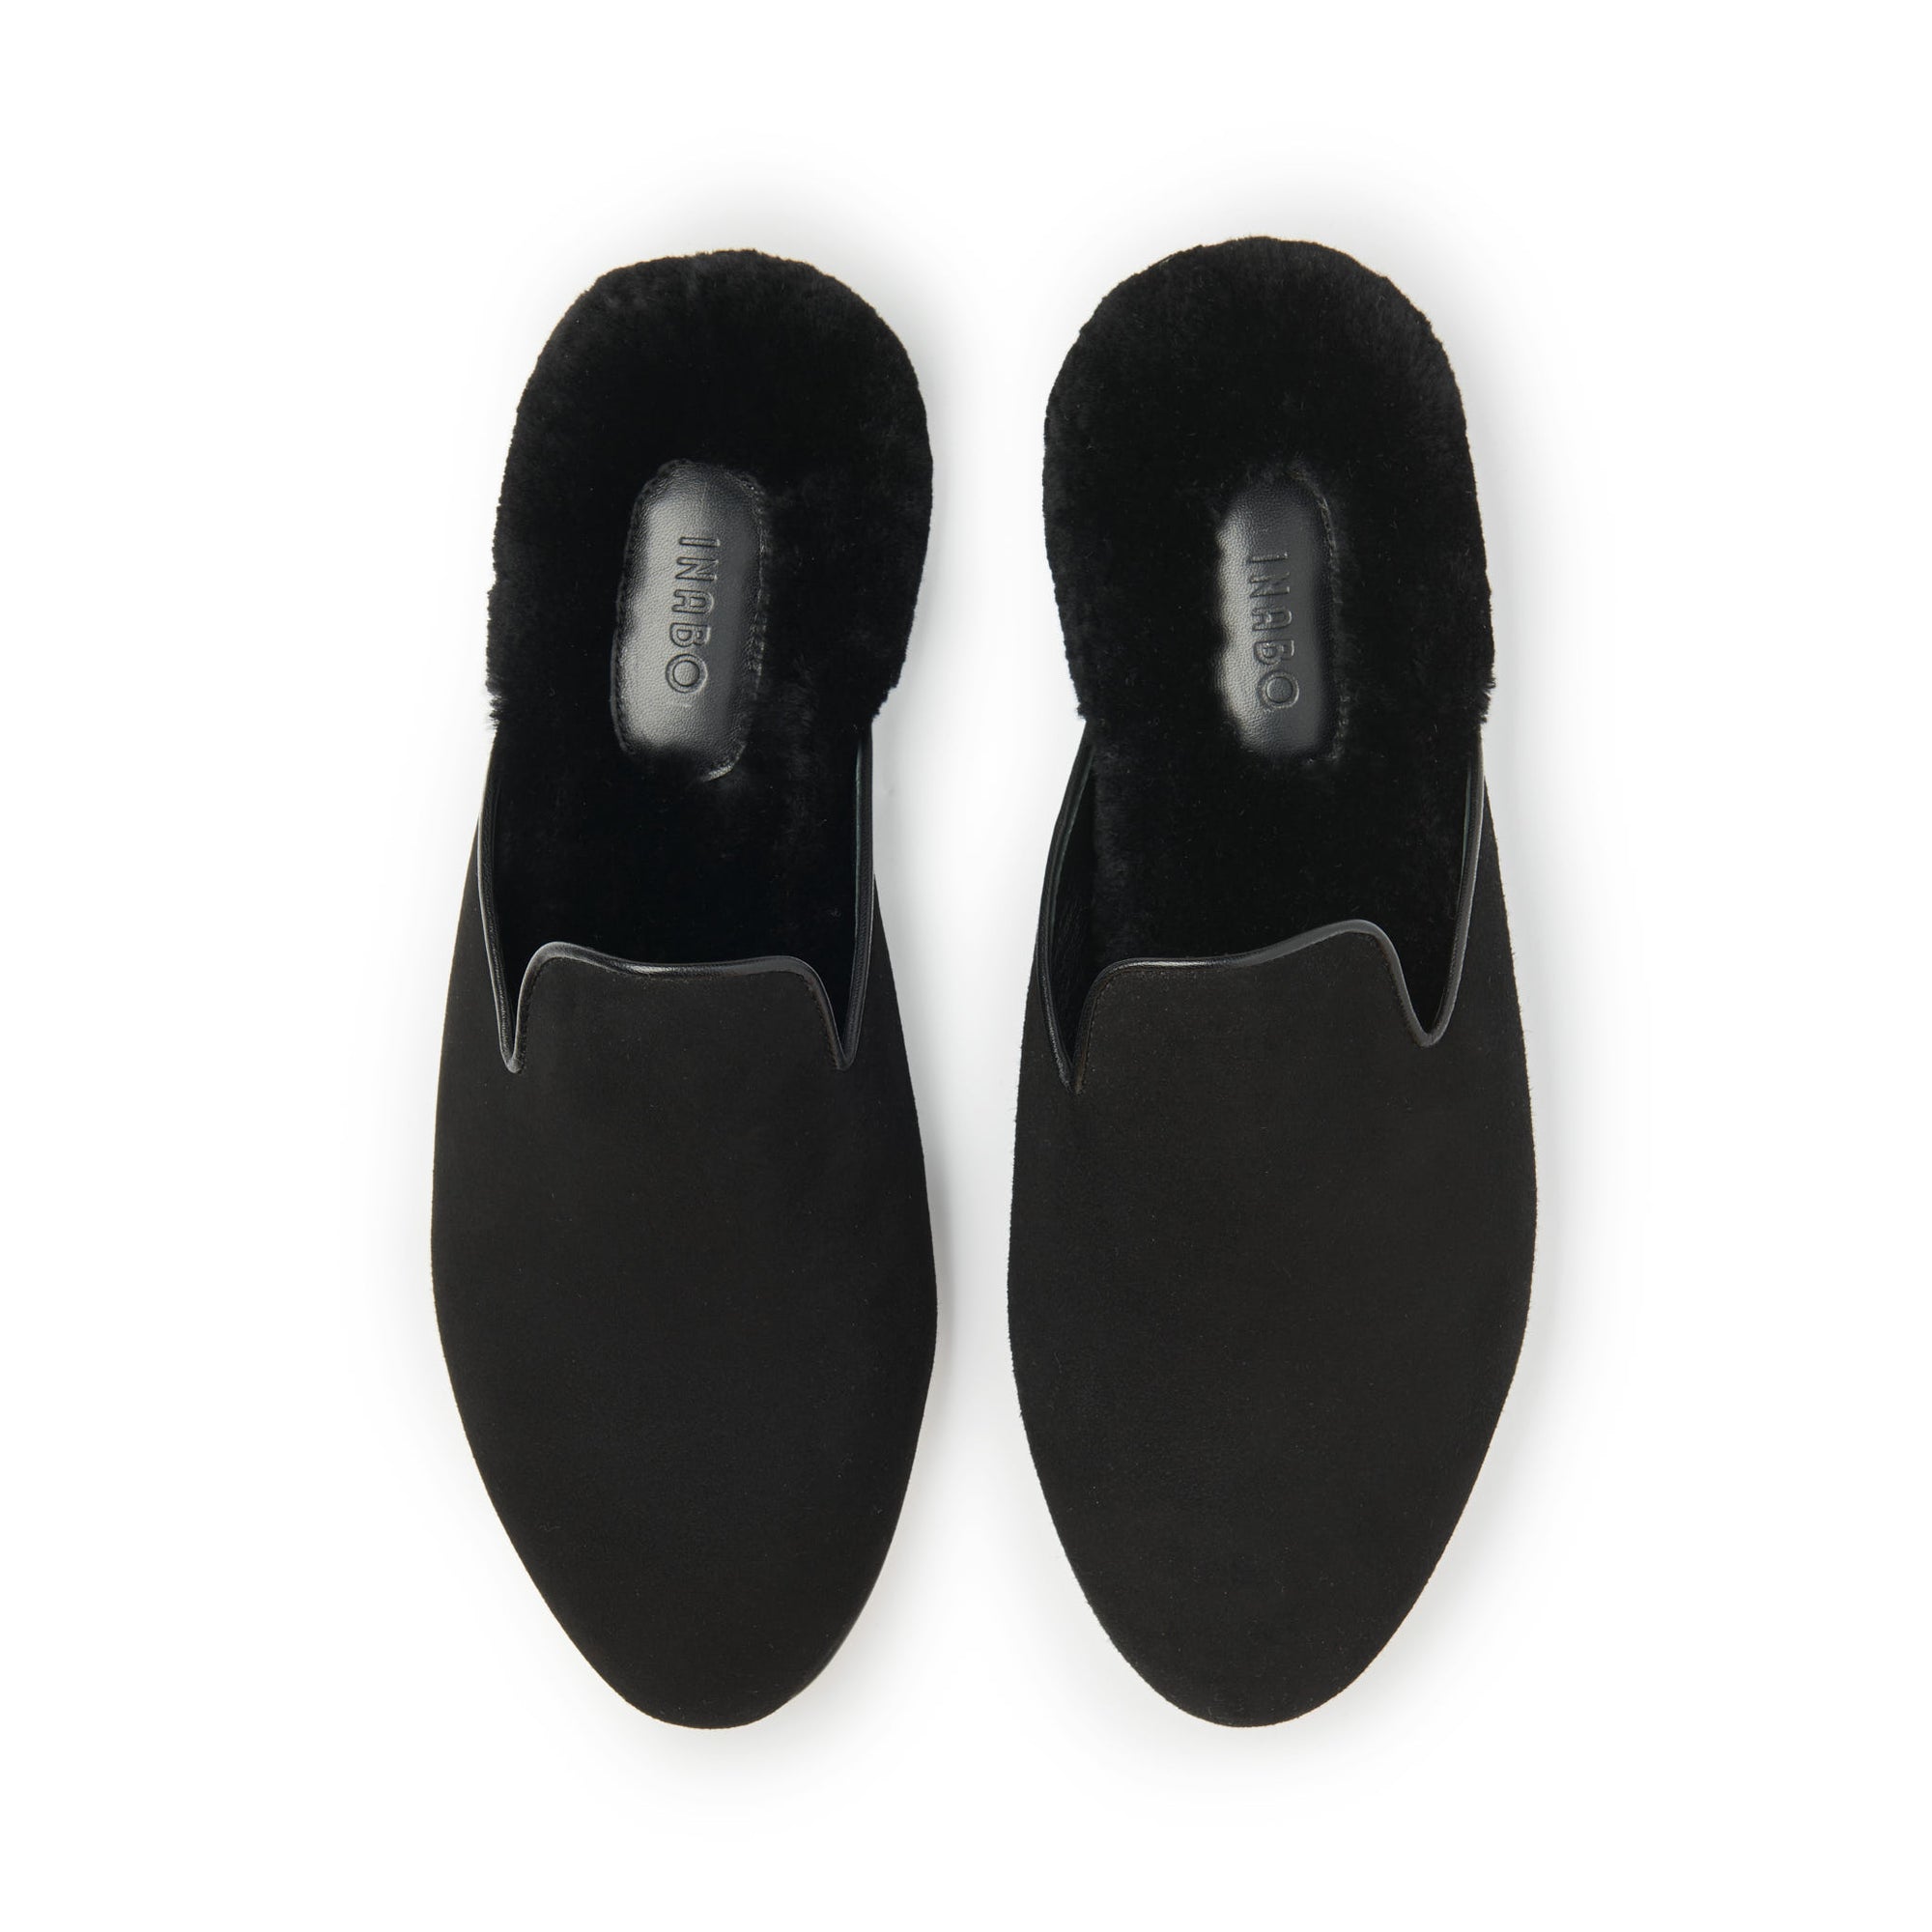 A pair of Inabo Men's Fritz Slipper in Black Suede and Shearling